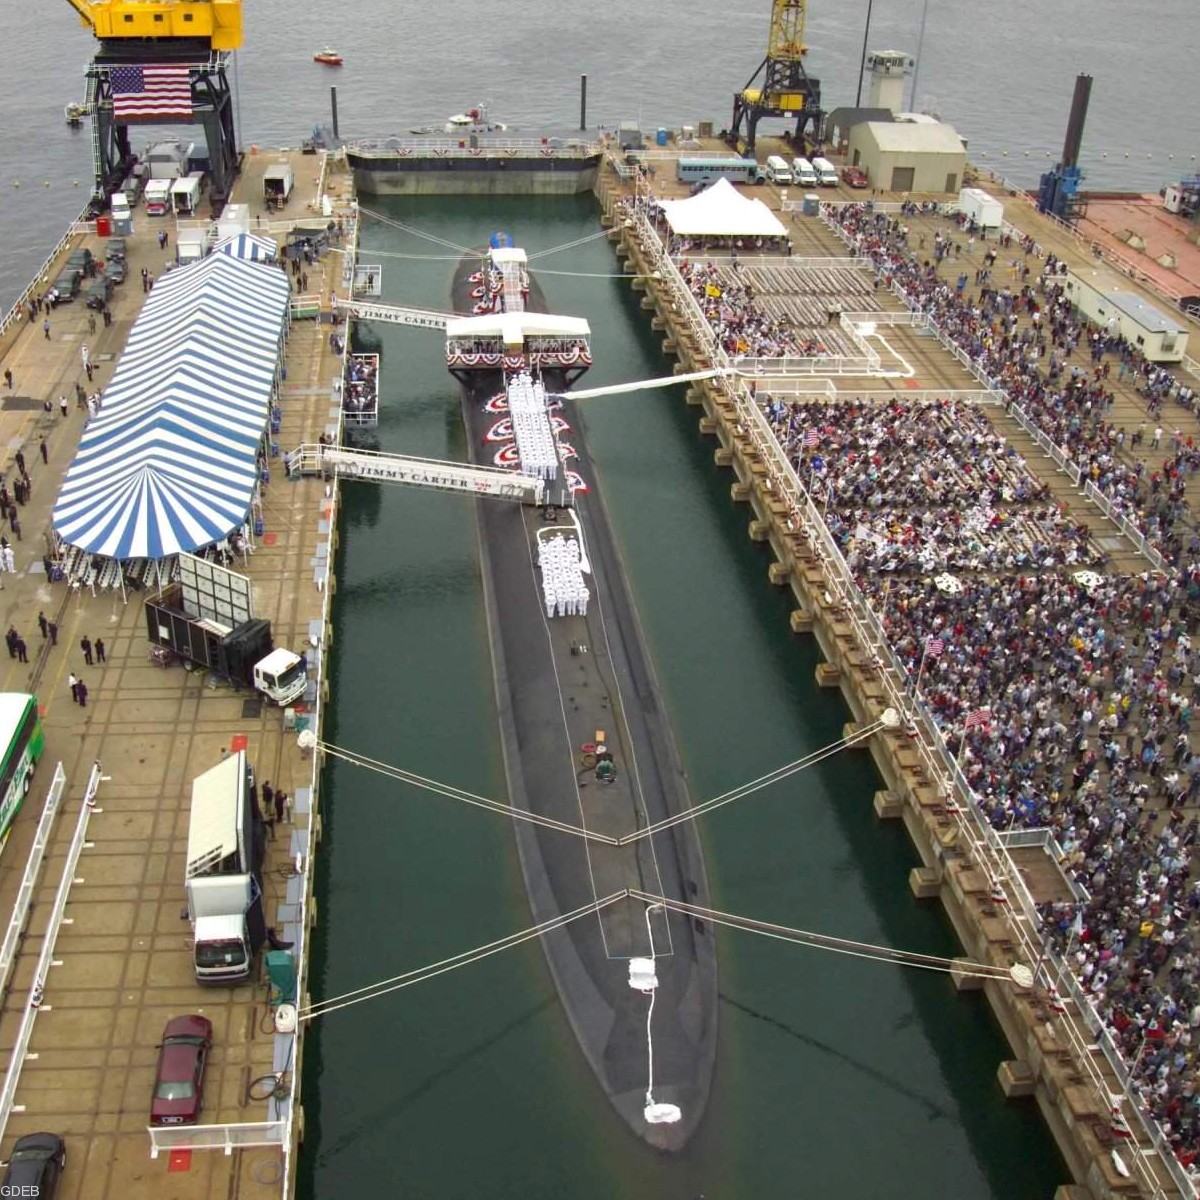 ssn-23 uss jimmy carter seawolf class attack submarine us navy christening general dynamics electric boat groton 02